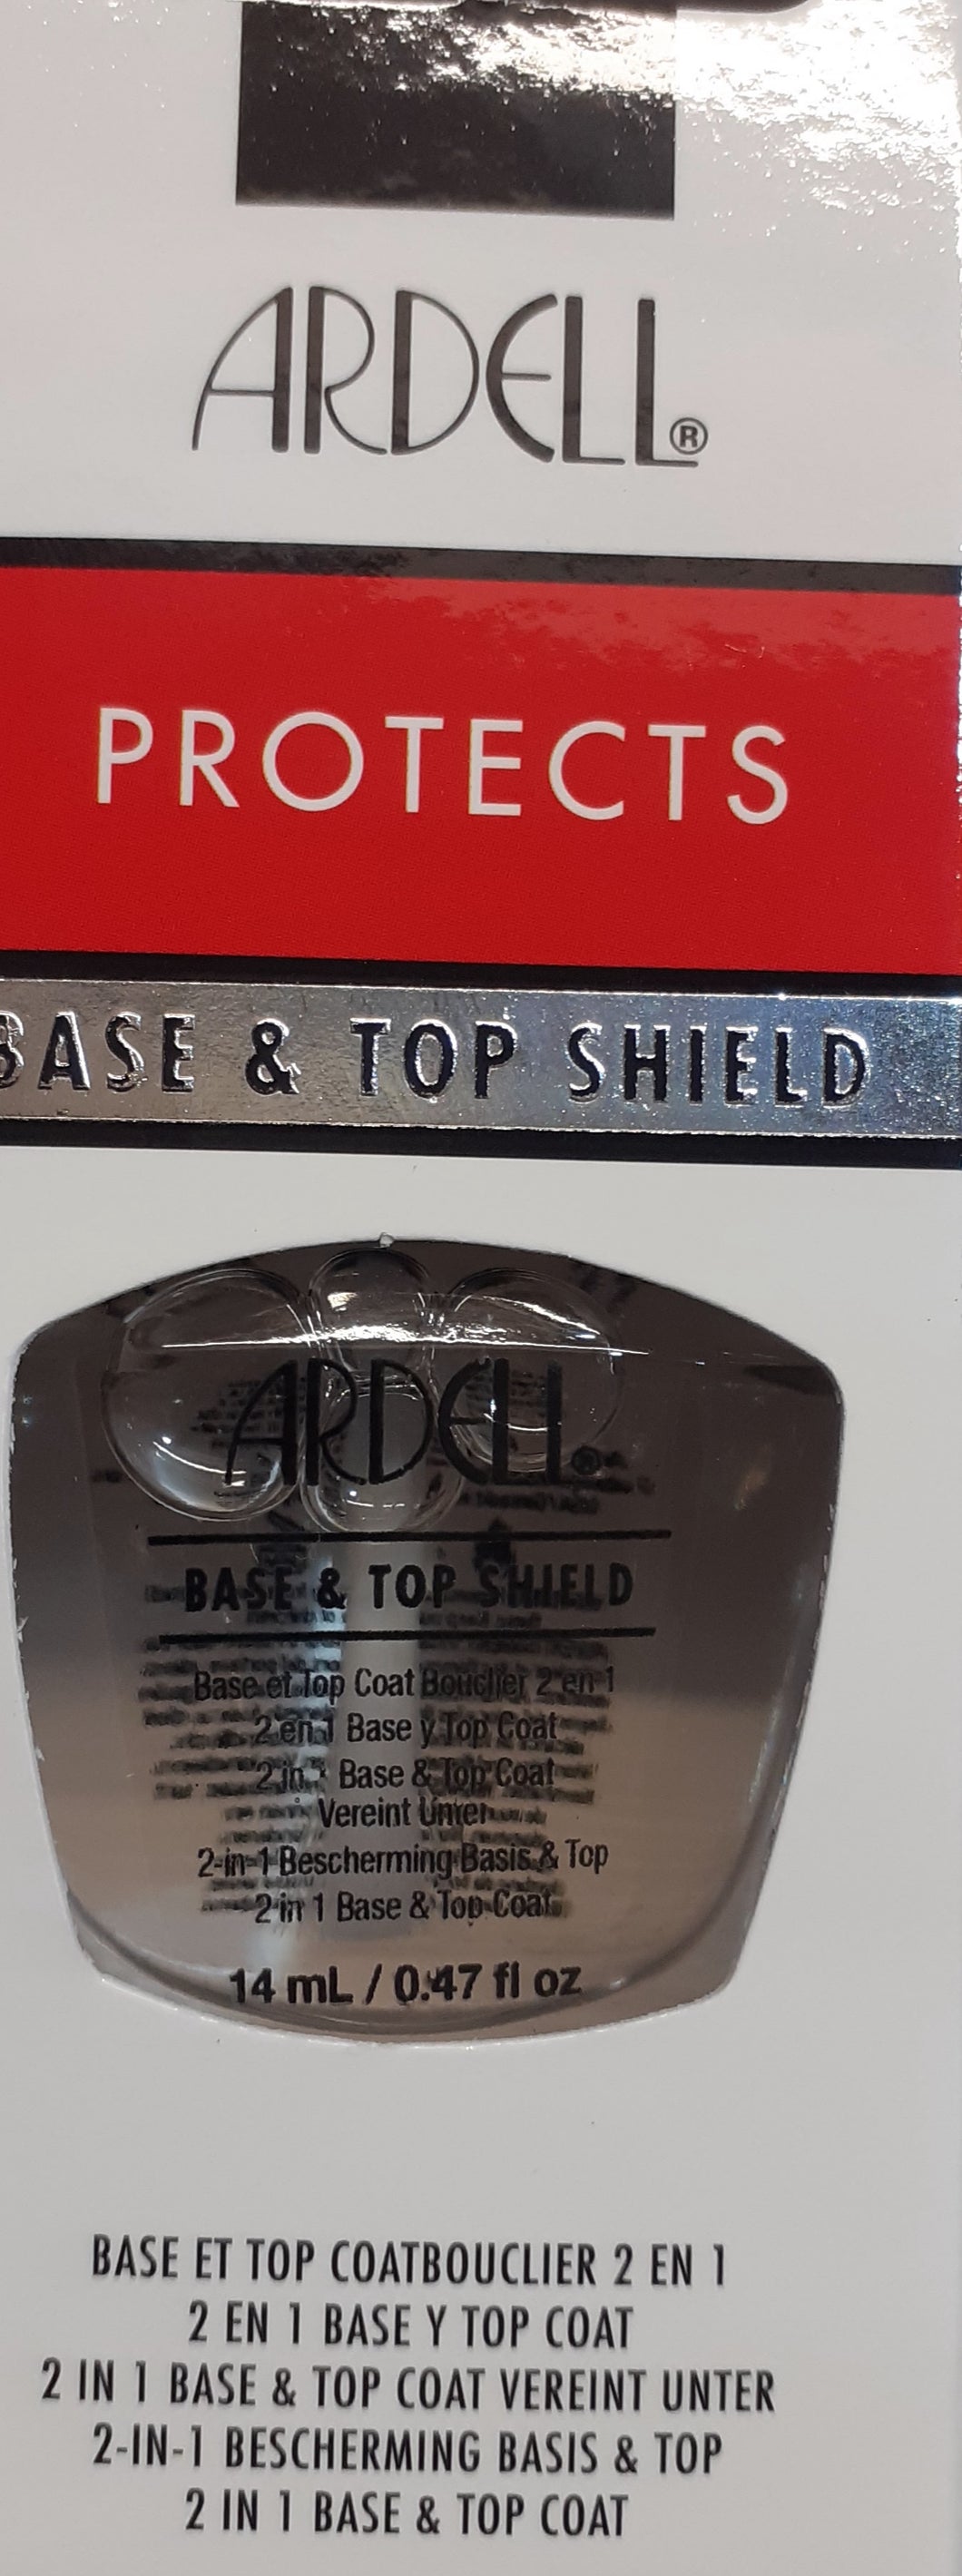 Ardeal protects